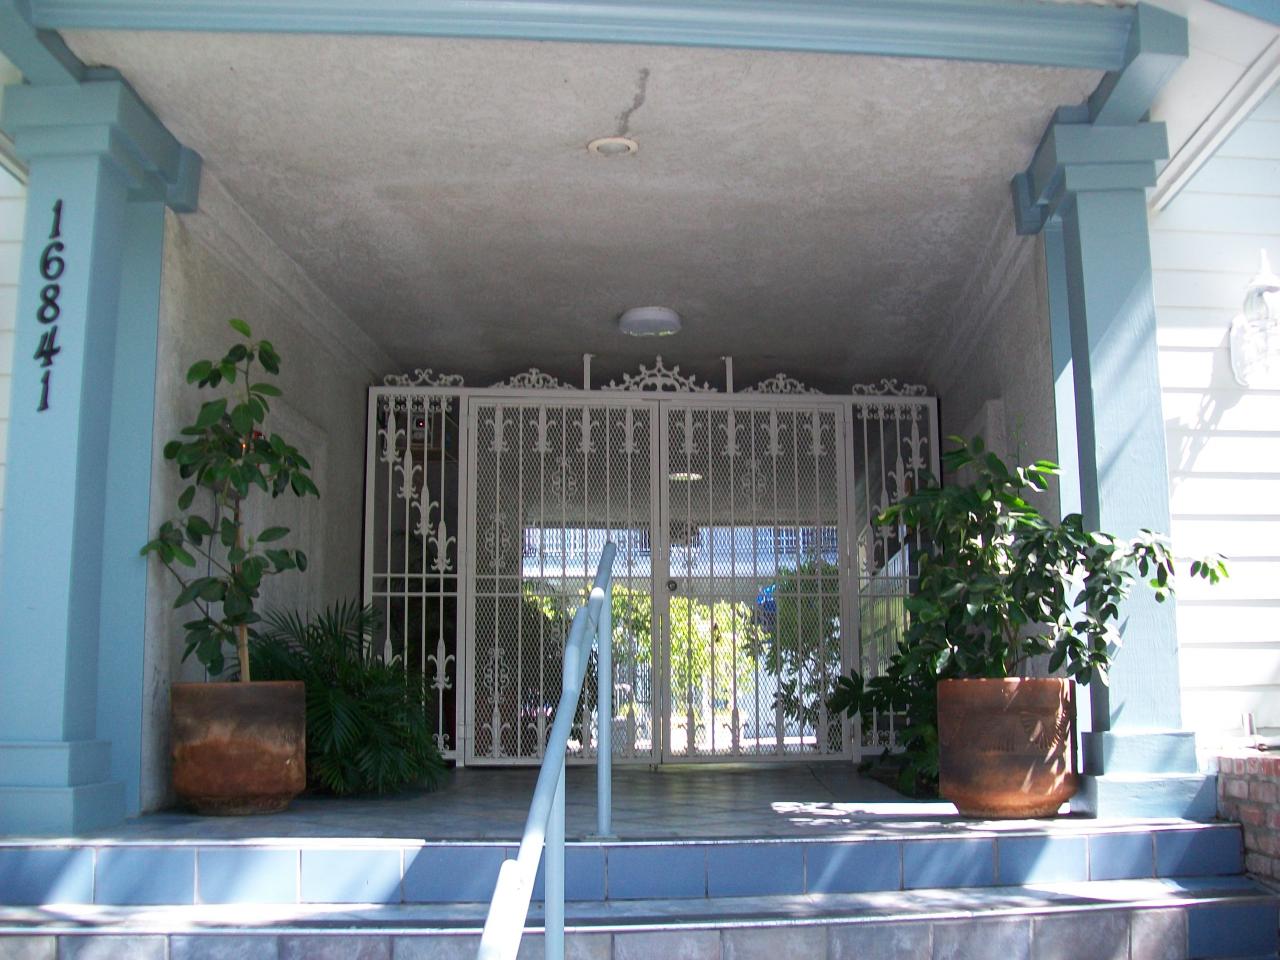 Photo of Kingsbury Villas Apartments - a view of the front gated entrance